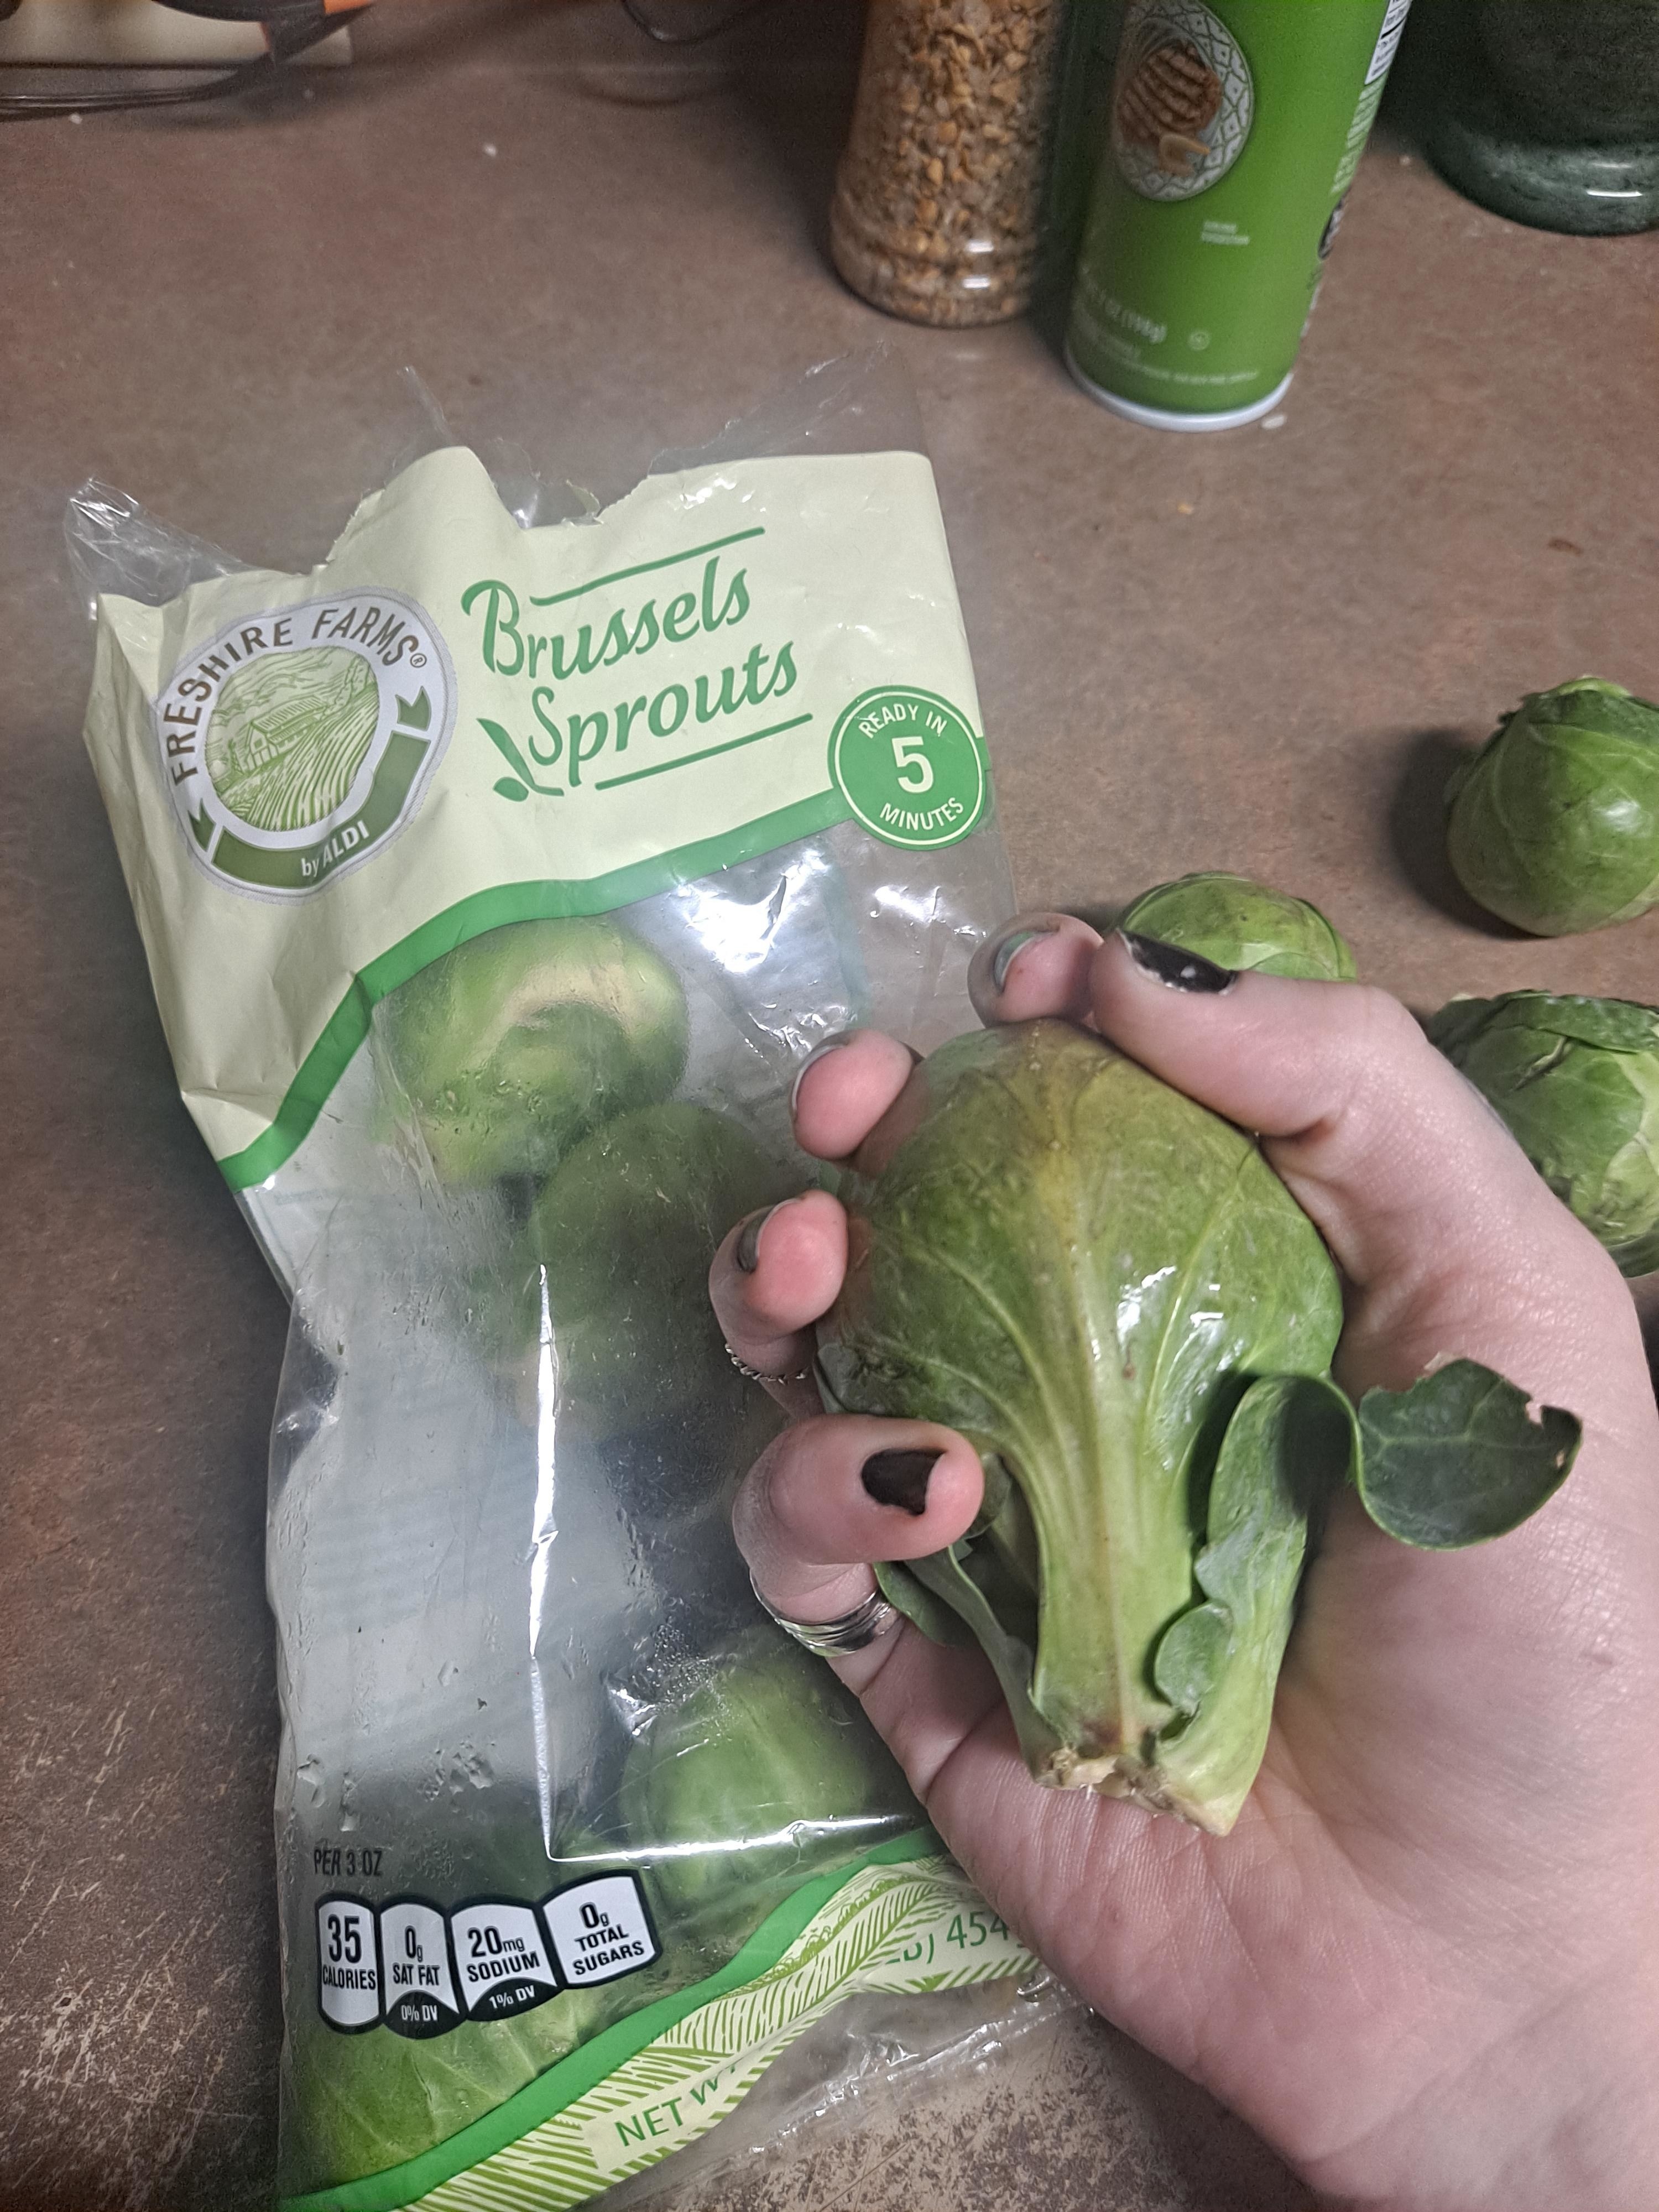 A giant Brussels sprout